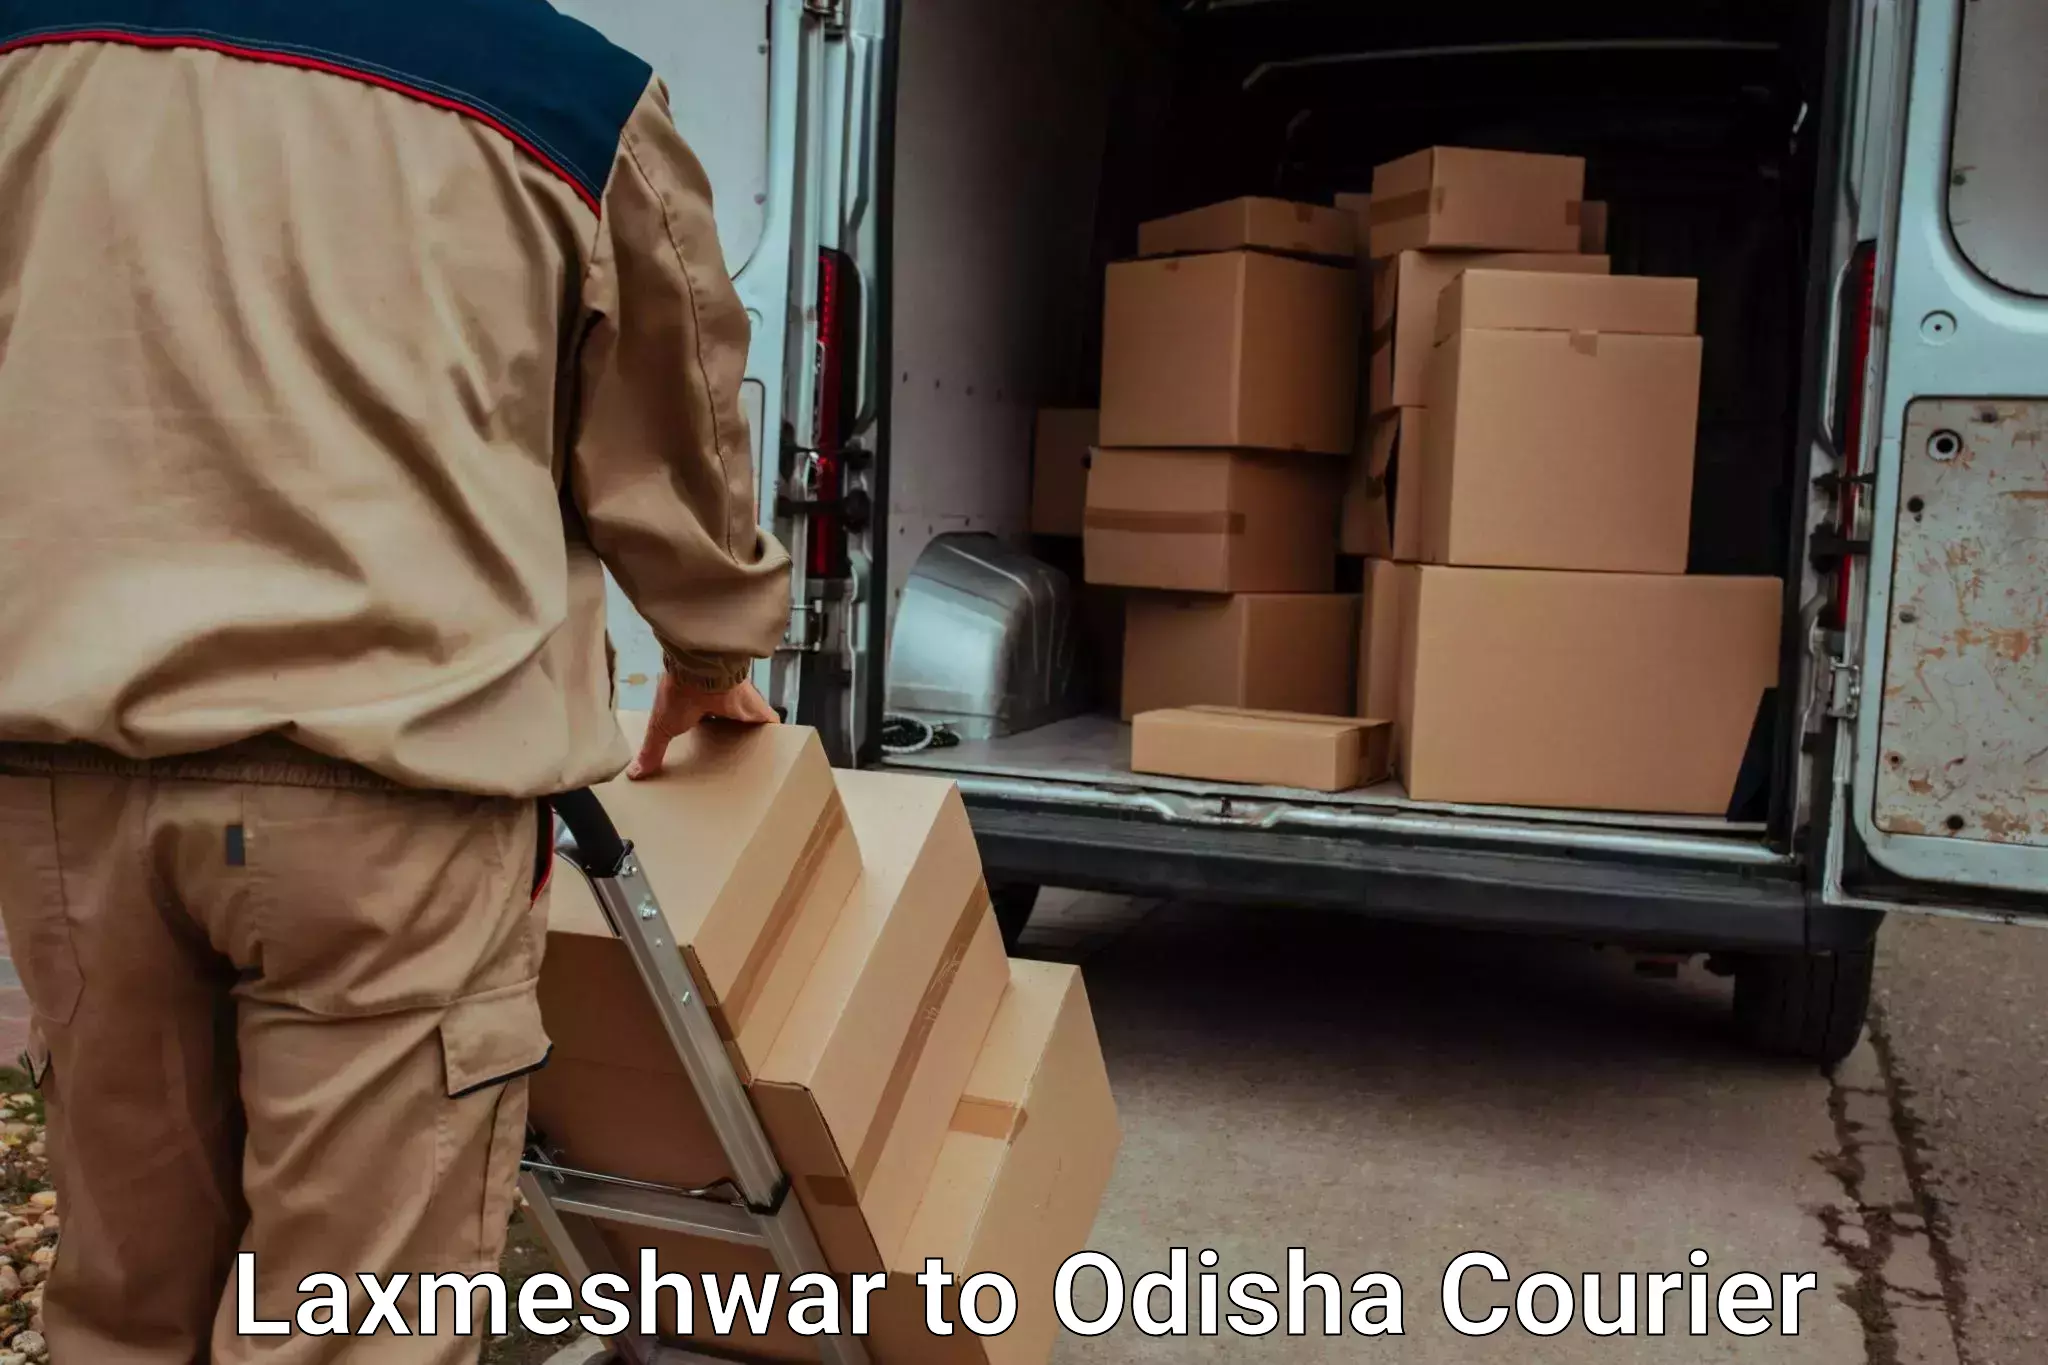 Baggage delivery technology Laxmeshwar to Baleswar